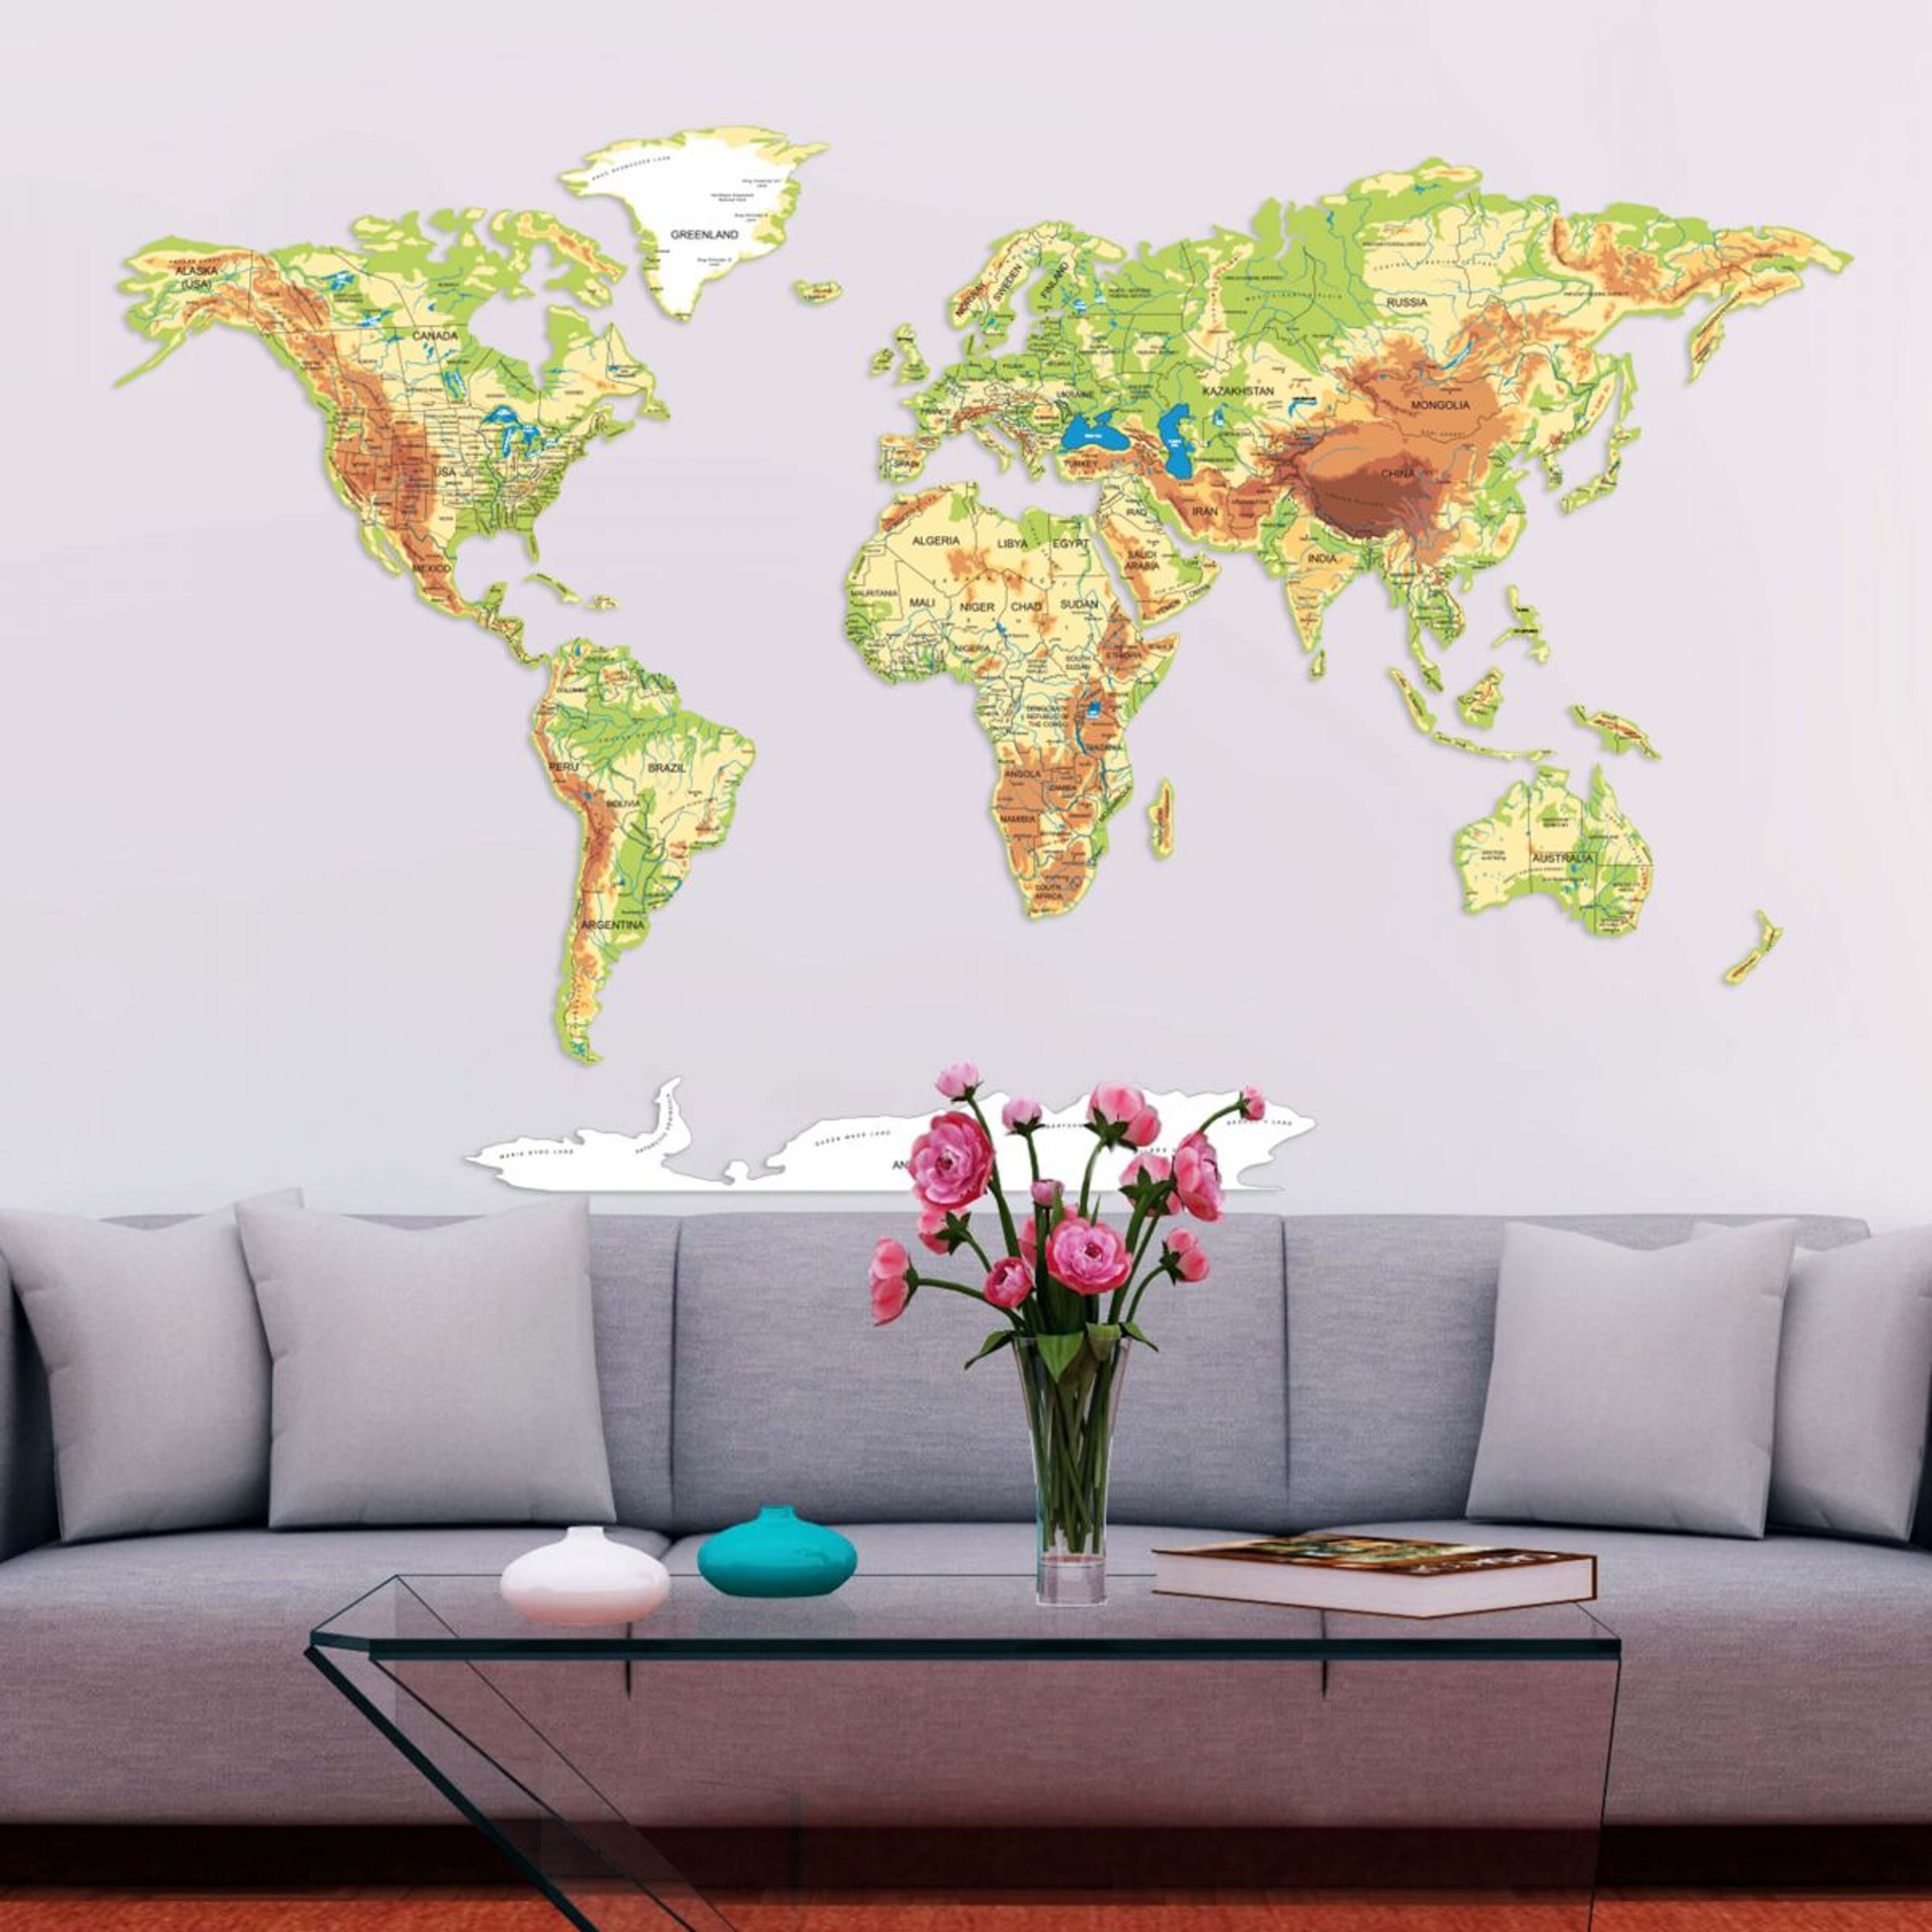 Sticker Map of the World Decal